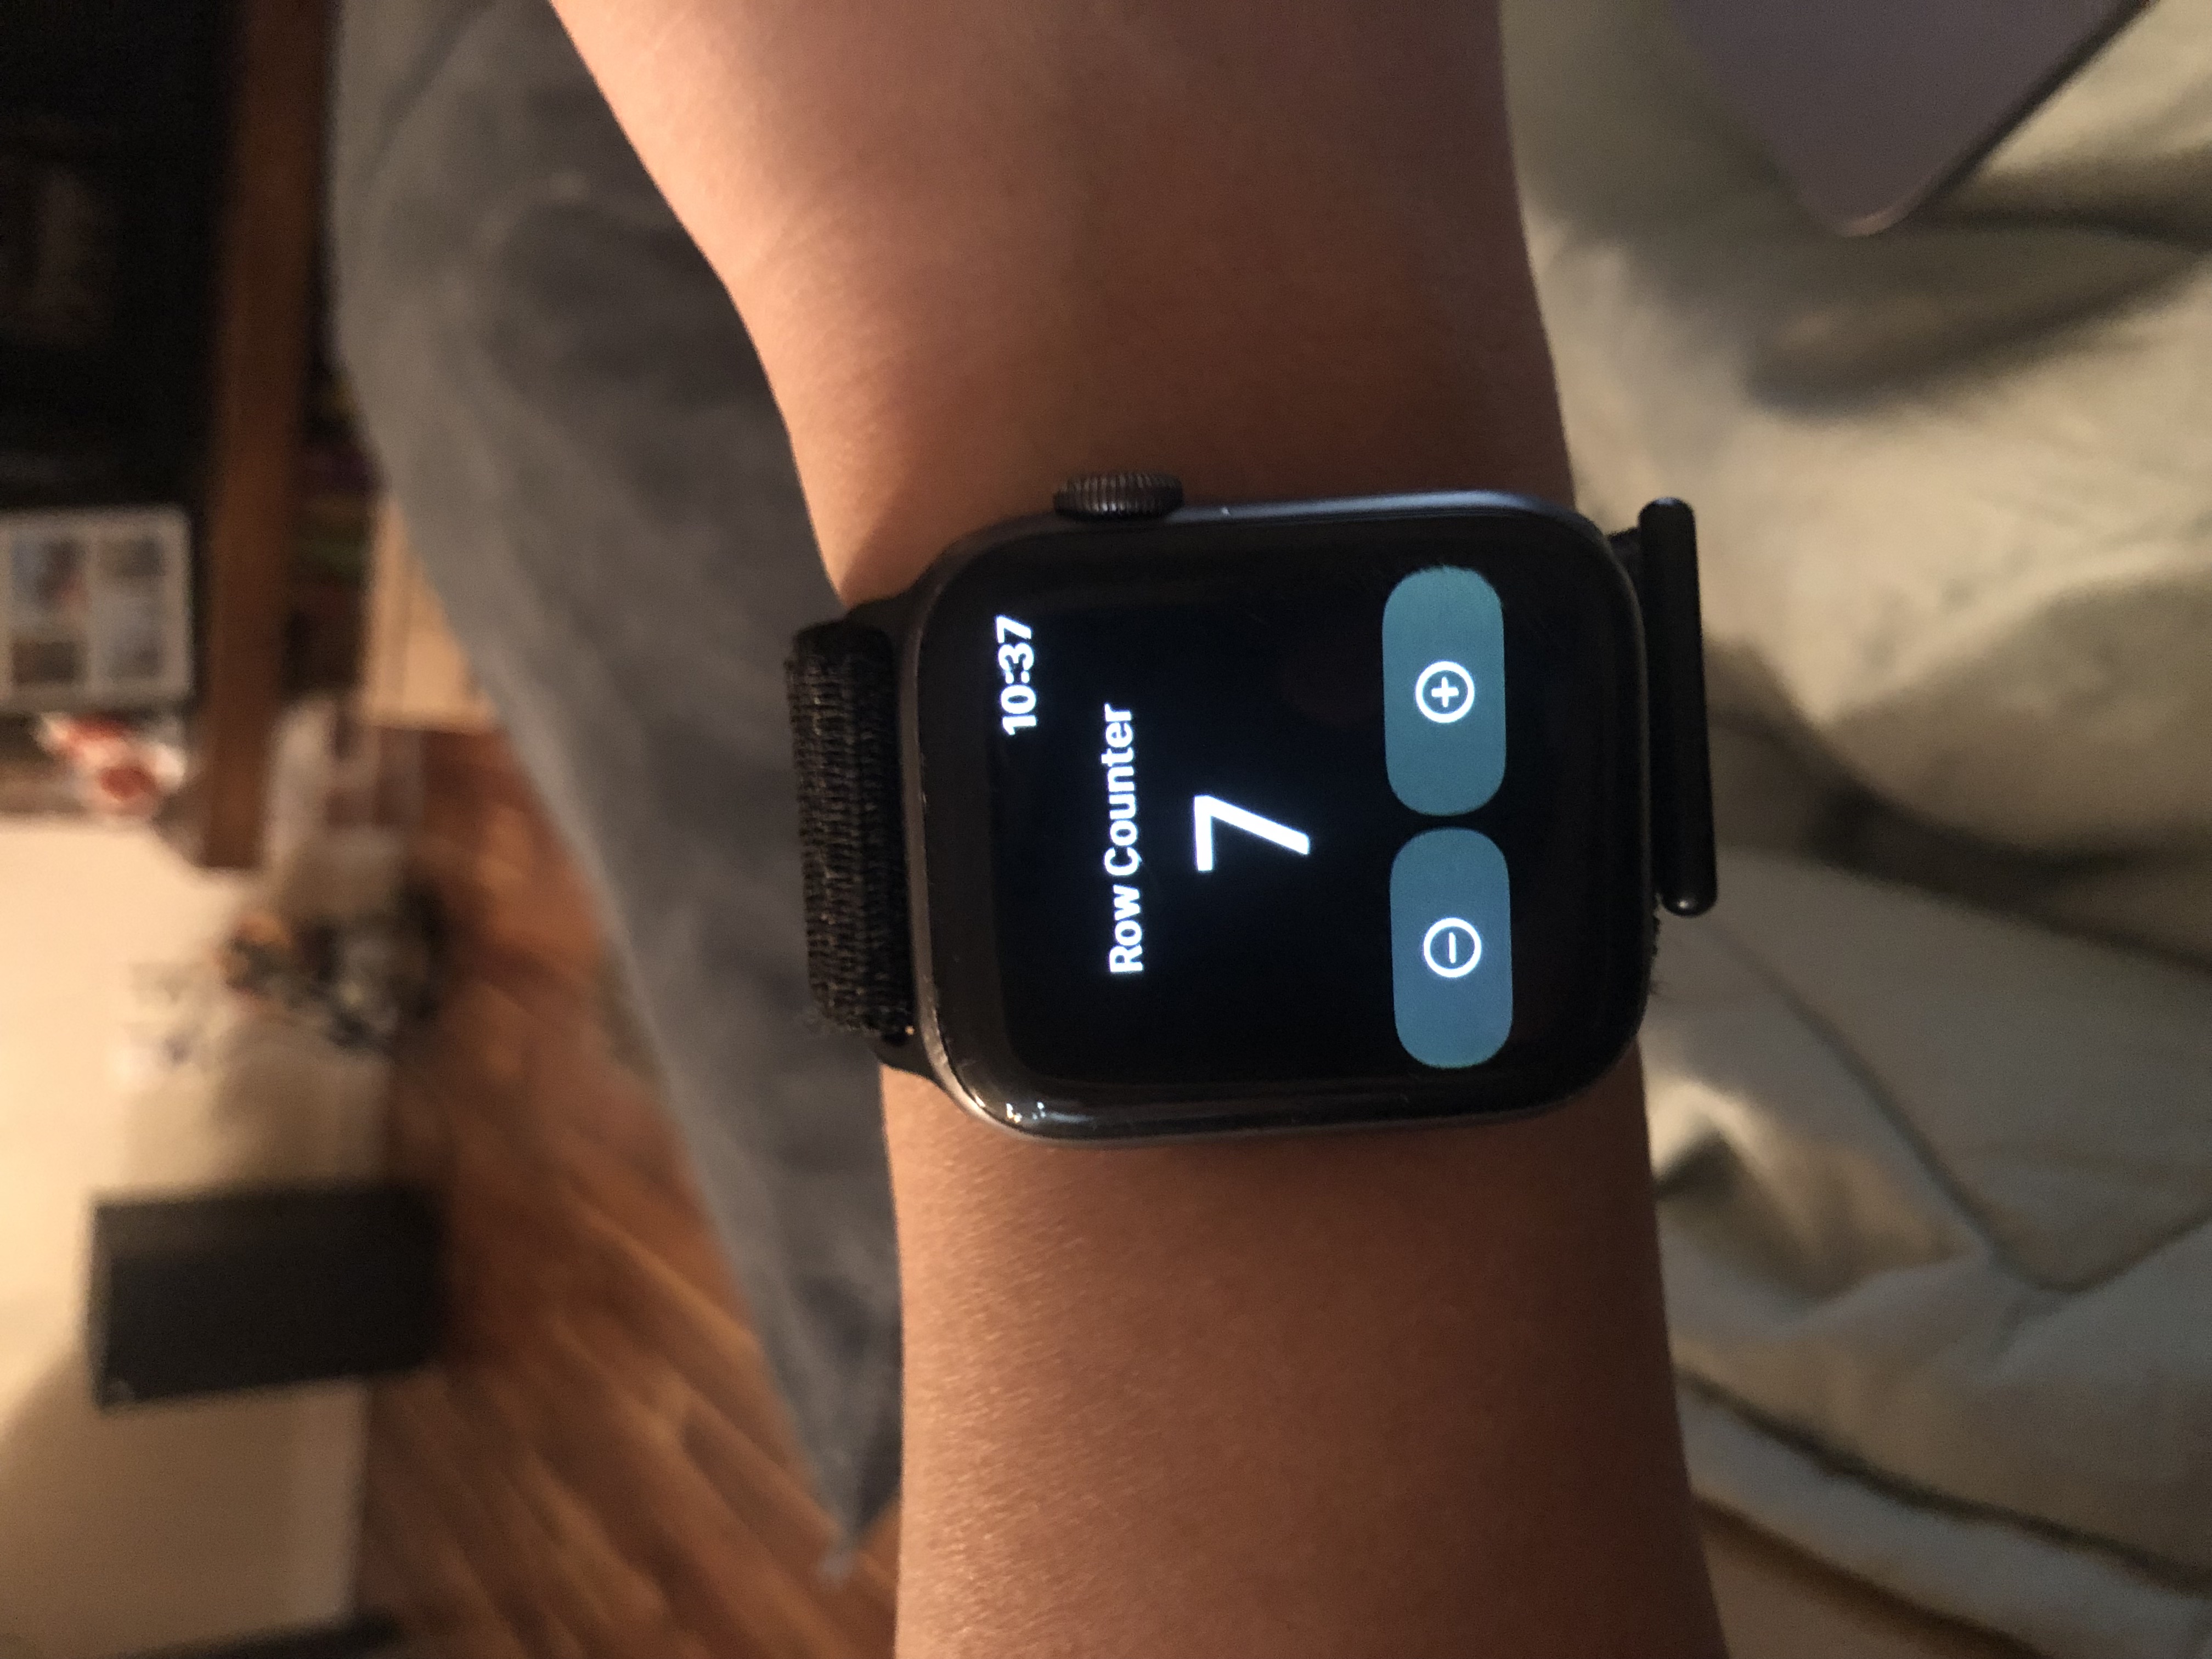 Apple Watch screen of version 1 ArisaKnits Row Counter app with a minus and plus button to increase or decrease the number of rows 